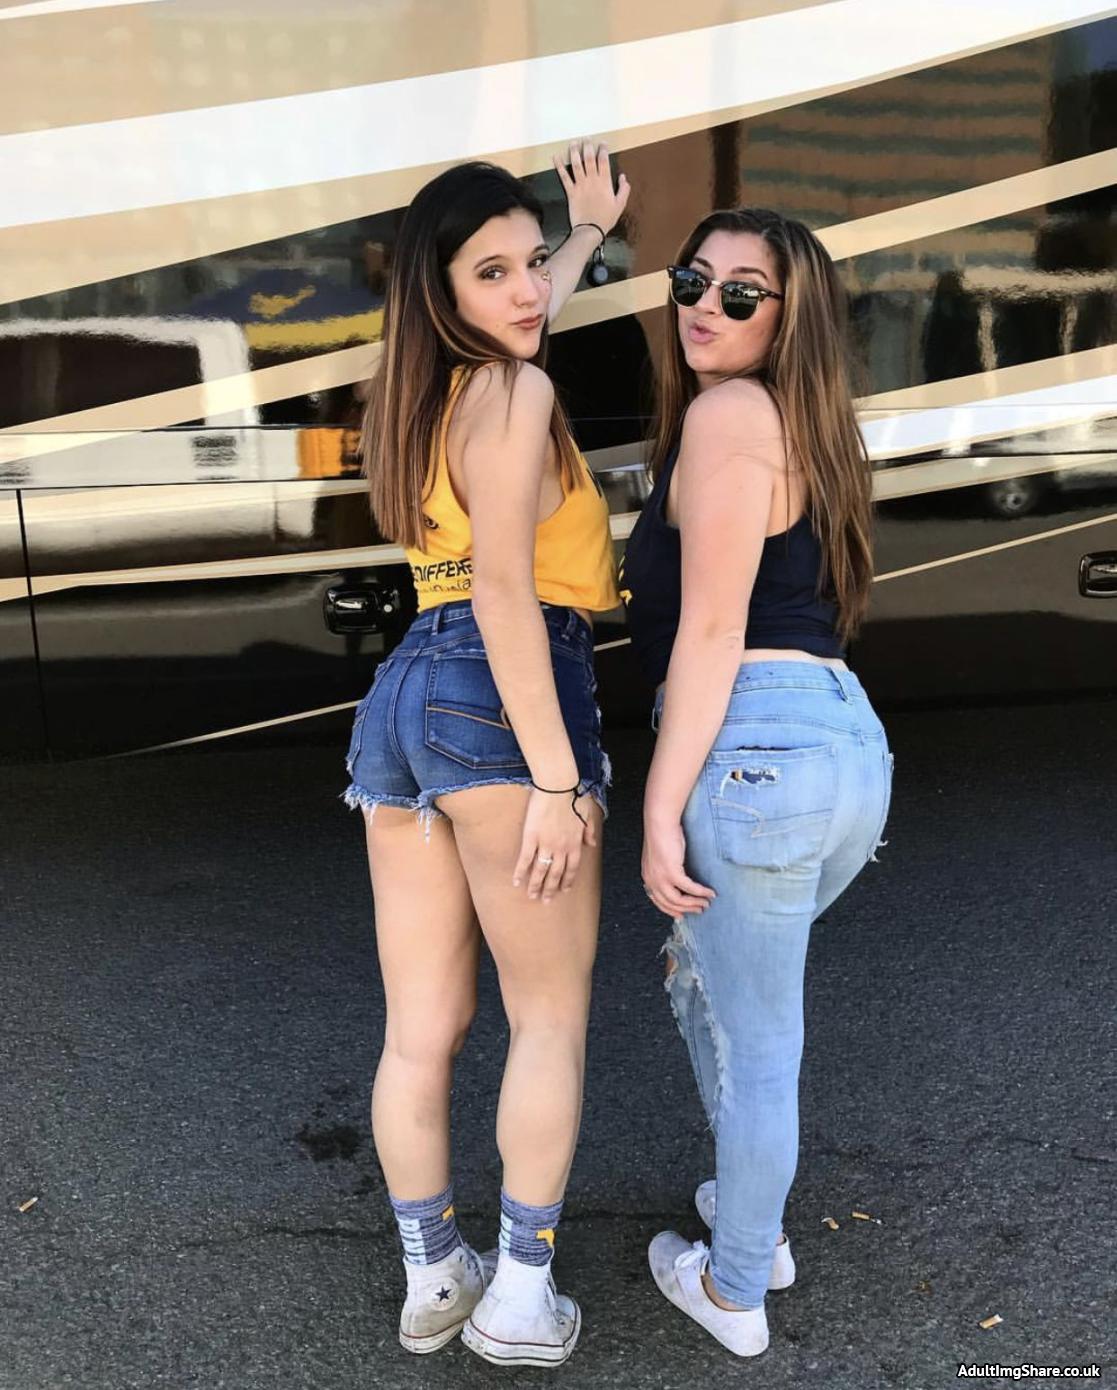 Two cute college girls with nice butts get a photo taken together